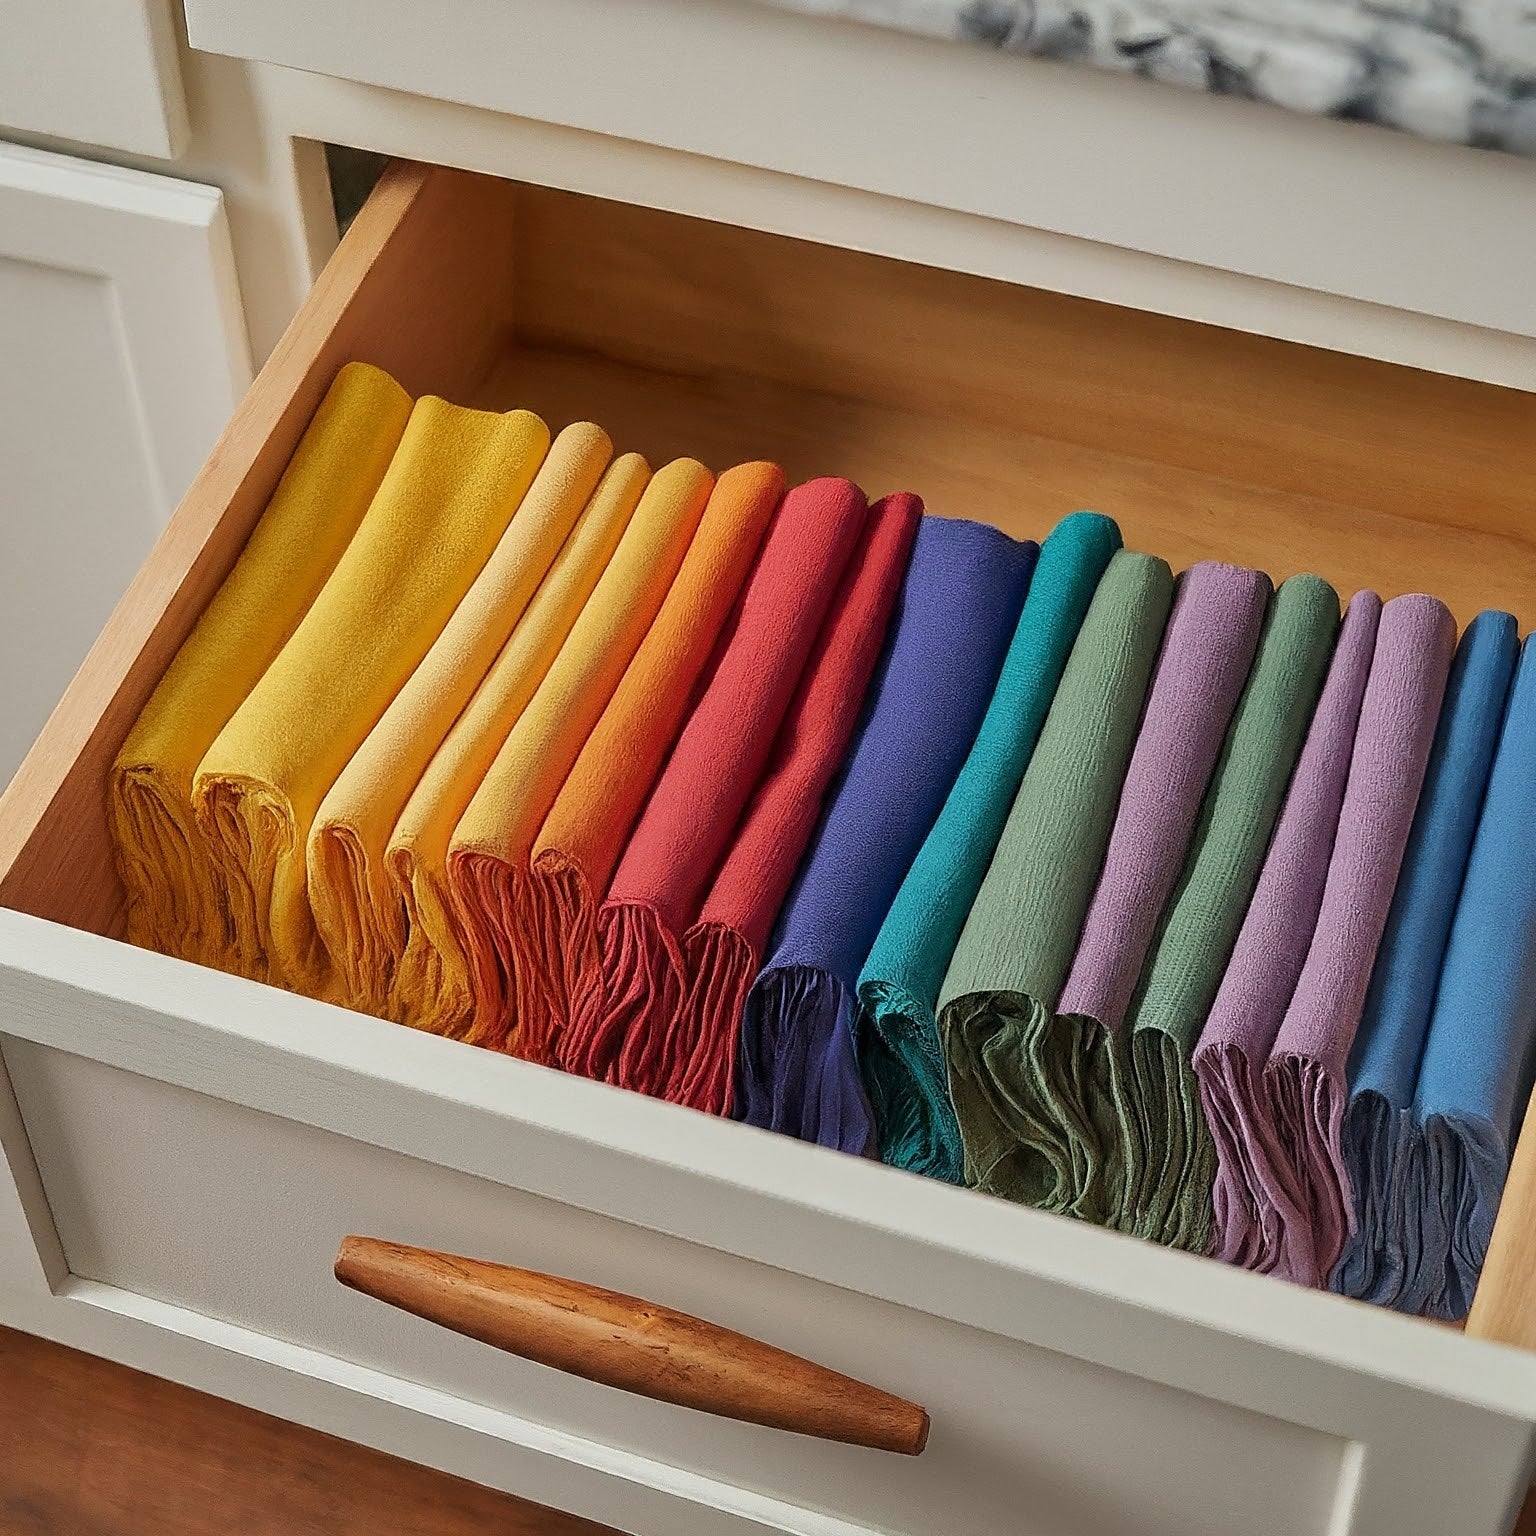 A stack of high-quality cloth napkins in various vibrant colors, neatly folded and arranged on a table.